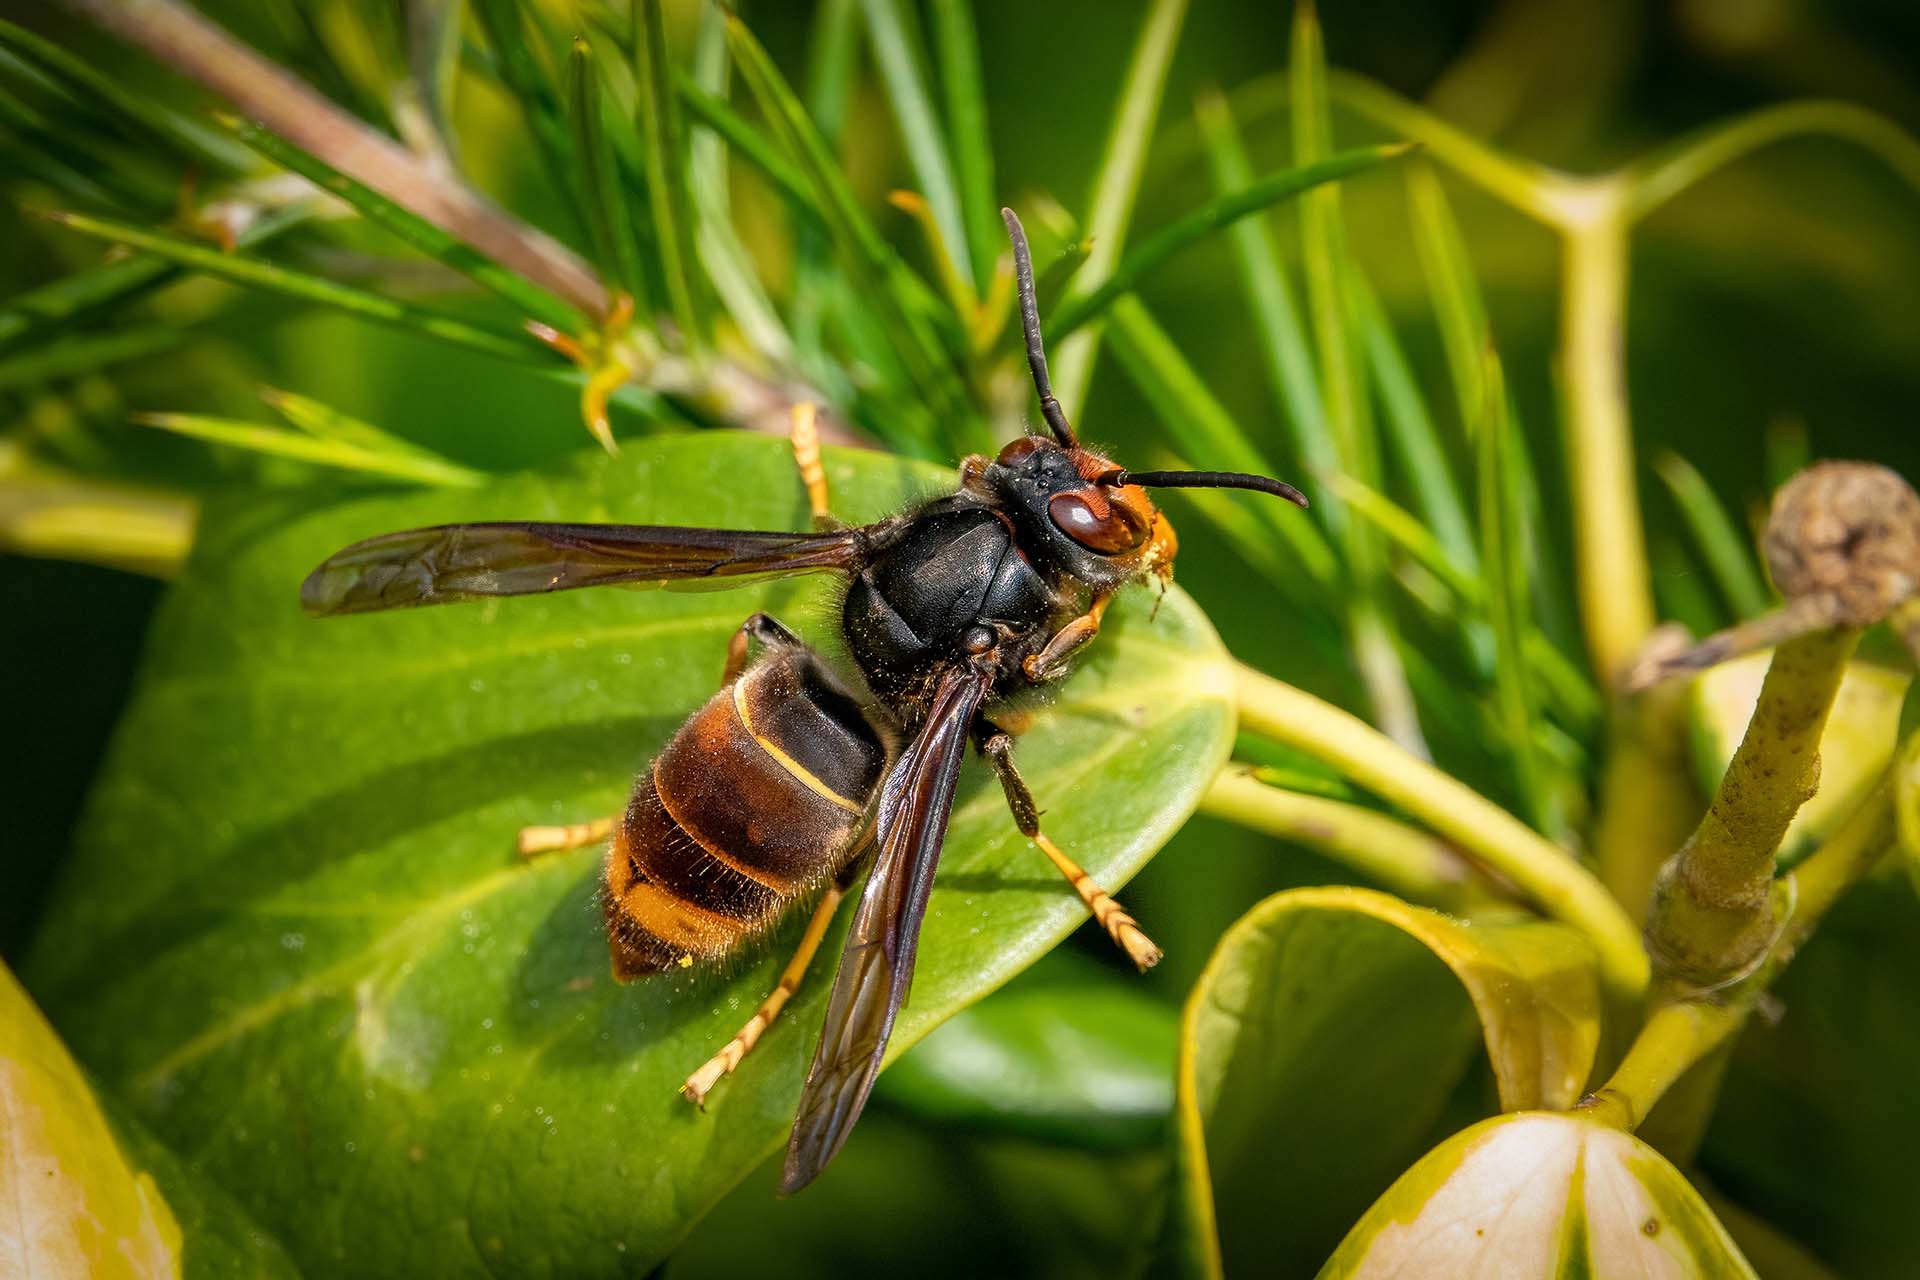 How to Identify a Hornet in the UK - a picture of an Asian hornet